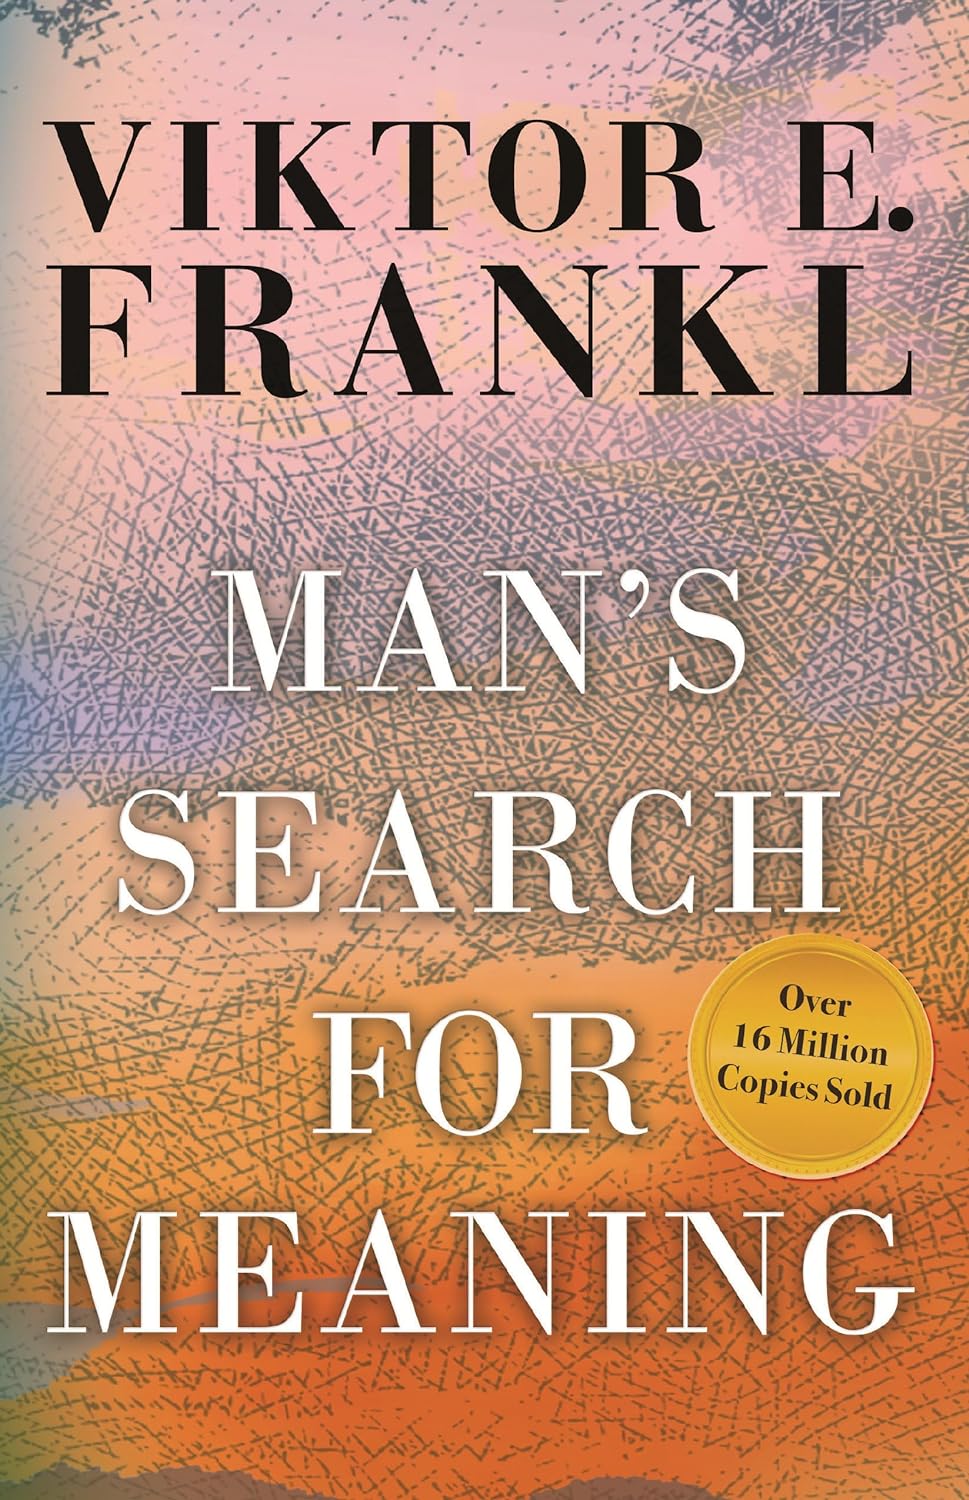 Man's Search for Meaning by Viktor E. Frankl (1946)